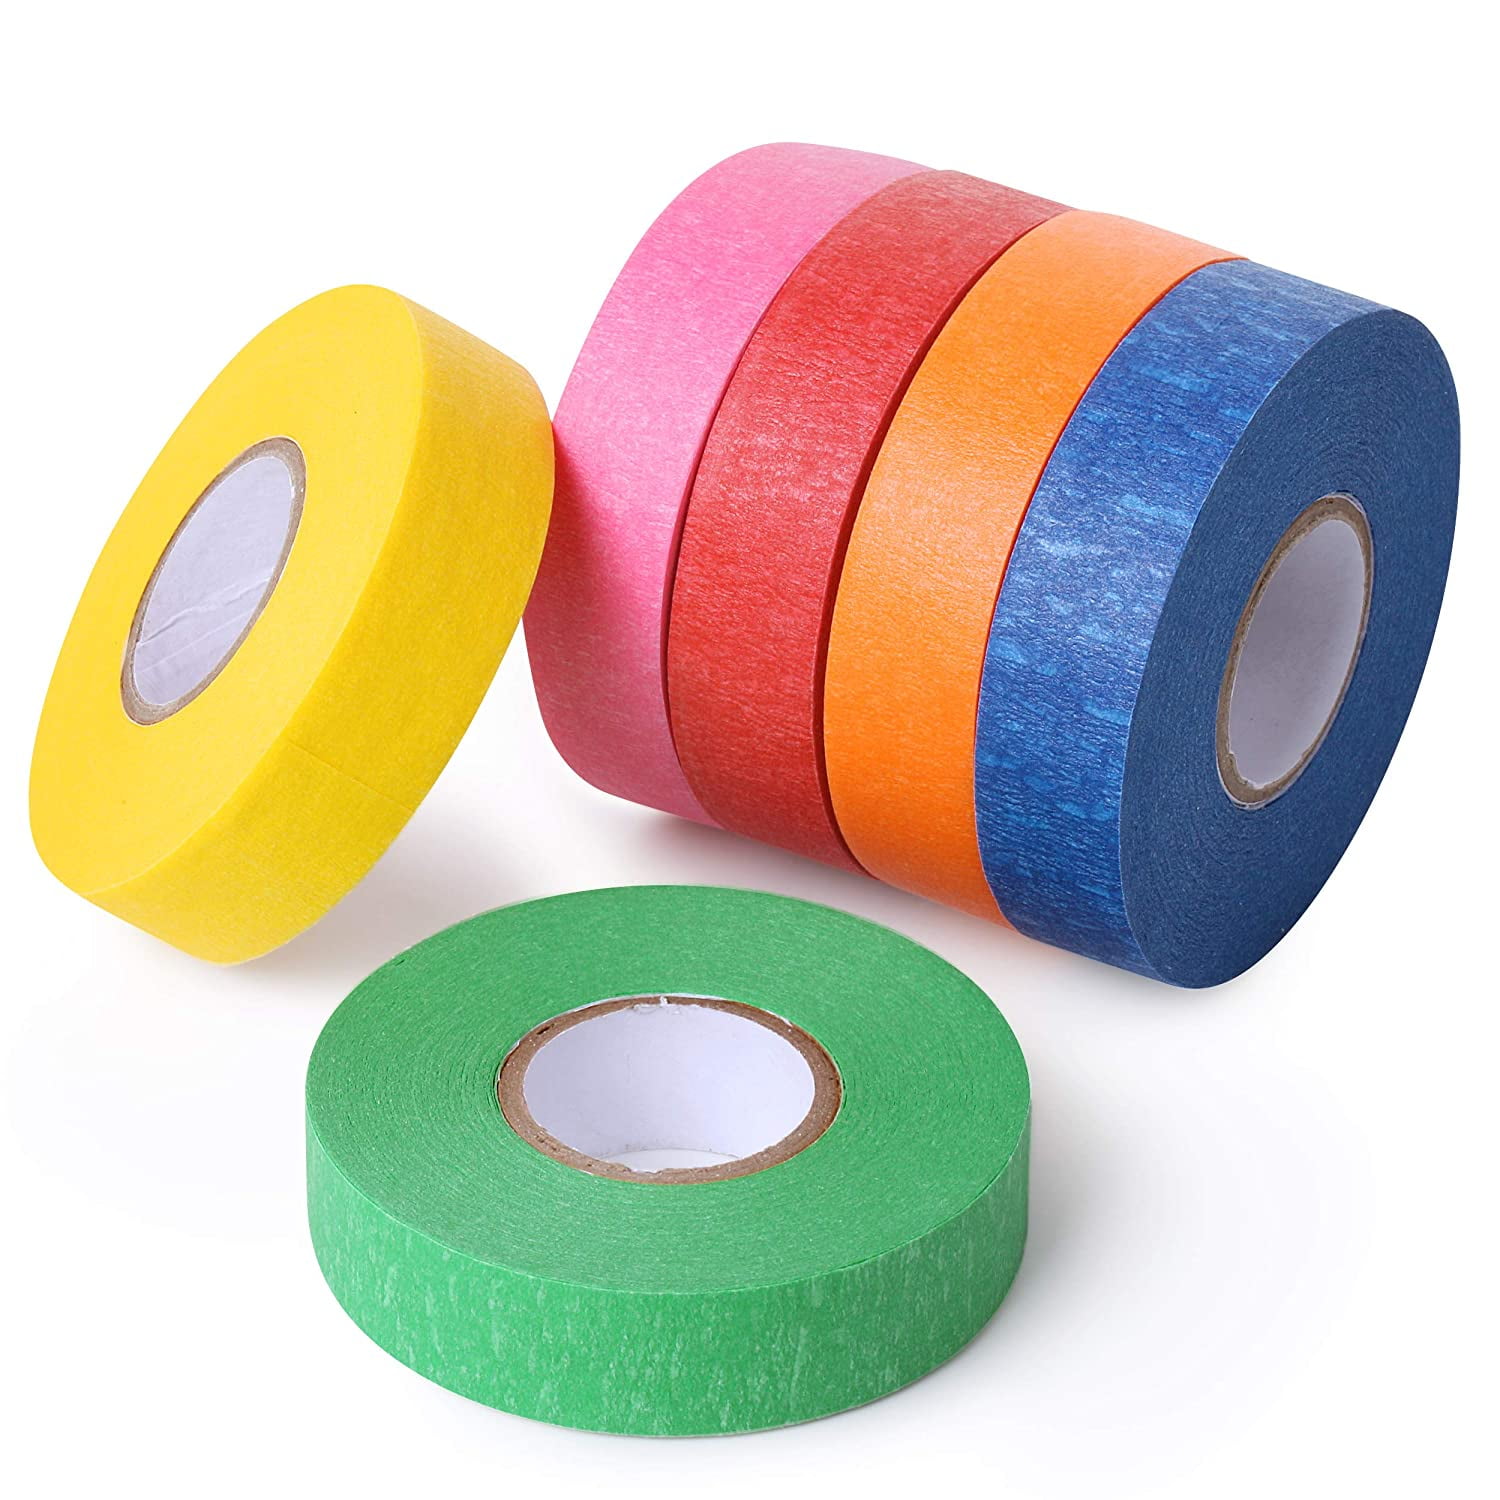 XFasten Adhesive Rollers for Crafting 0.3 x 360 4-Pack Multicolor, Scrapbooking Kit, Acid Free Double Sided Tape for Crafts, Scrapbook Glue Tape